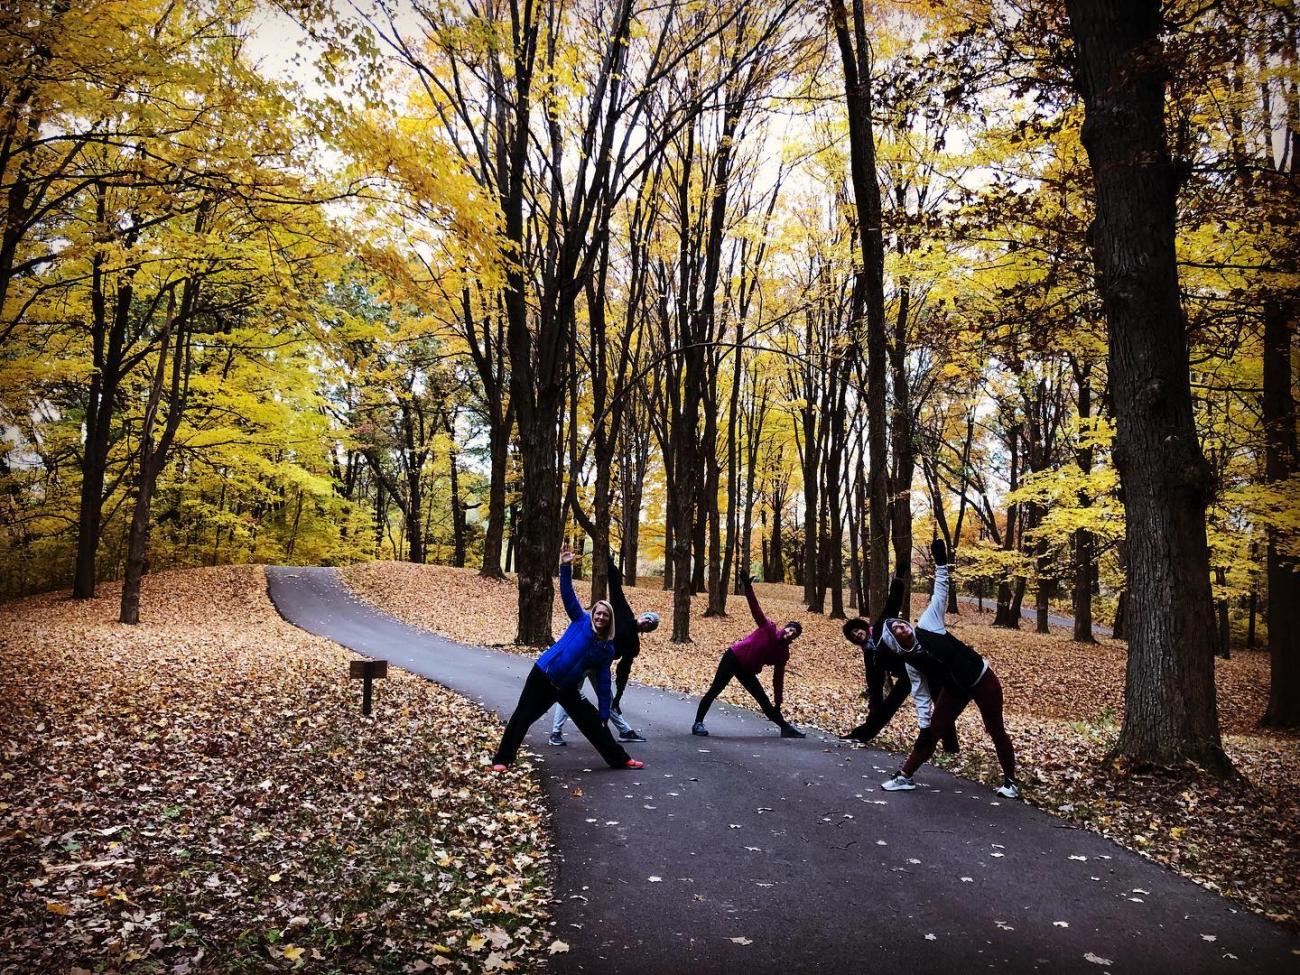 Yoga participants stretching in a forest in the fall.